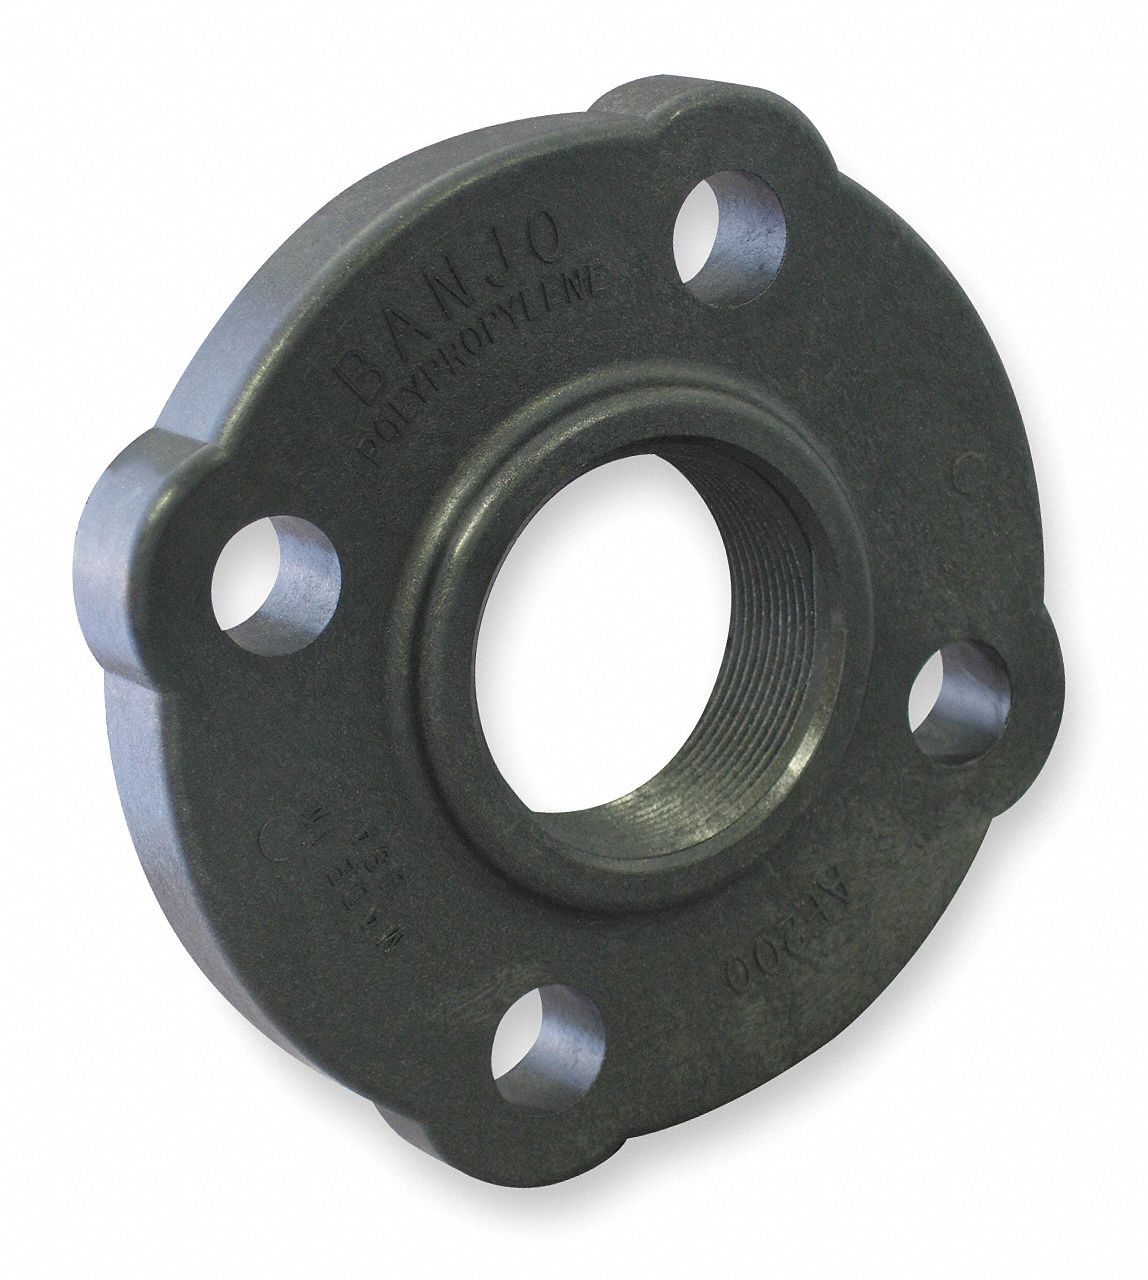 Flange,Class 150,1 In,FPT,Poly,Black